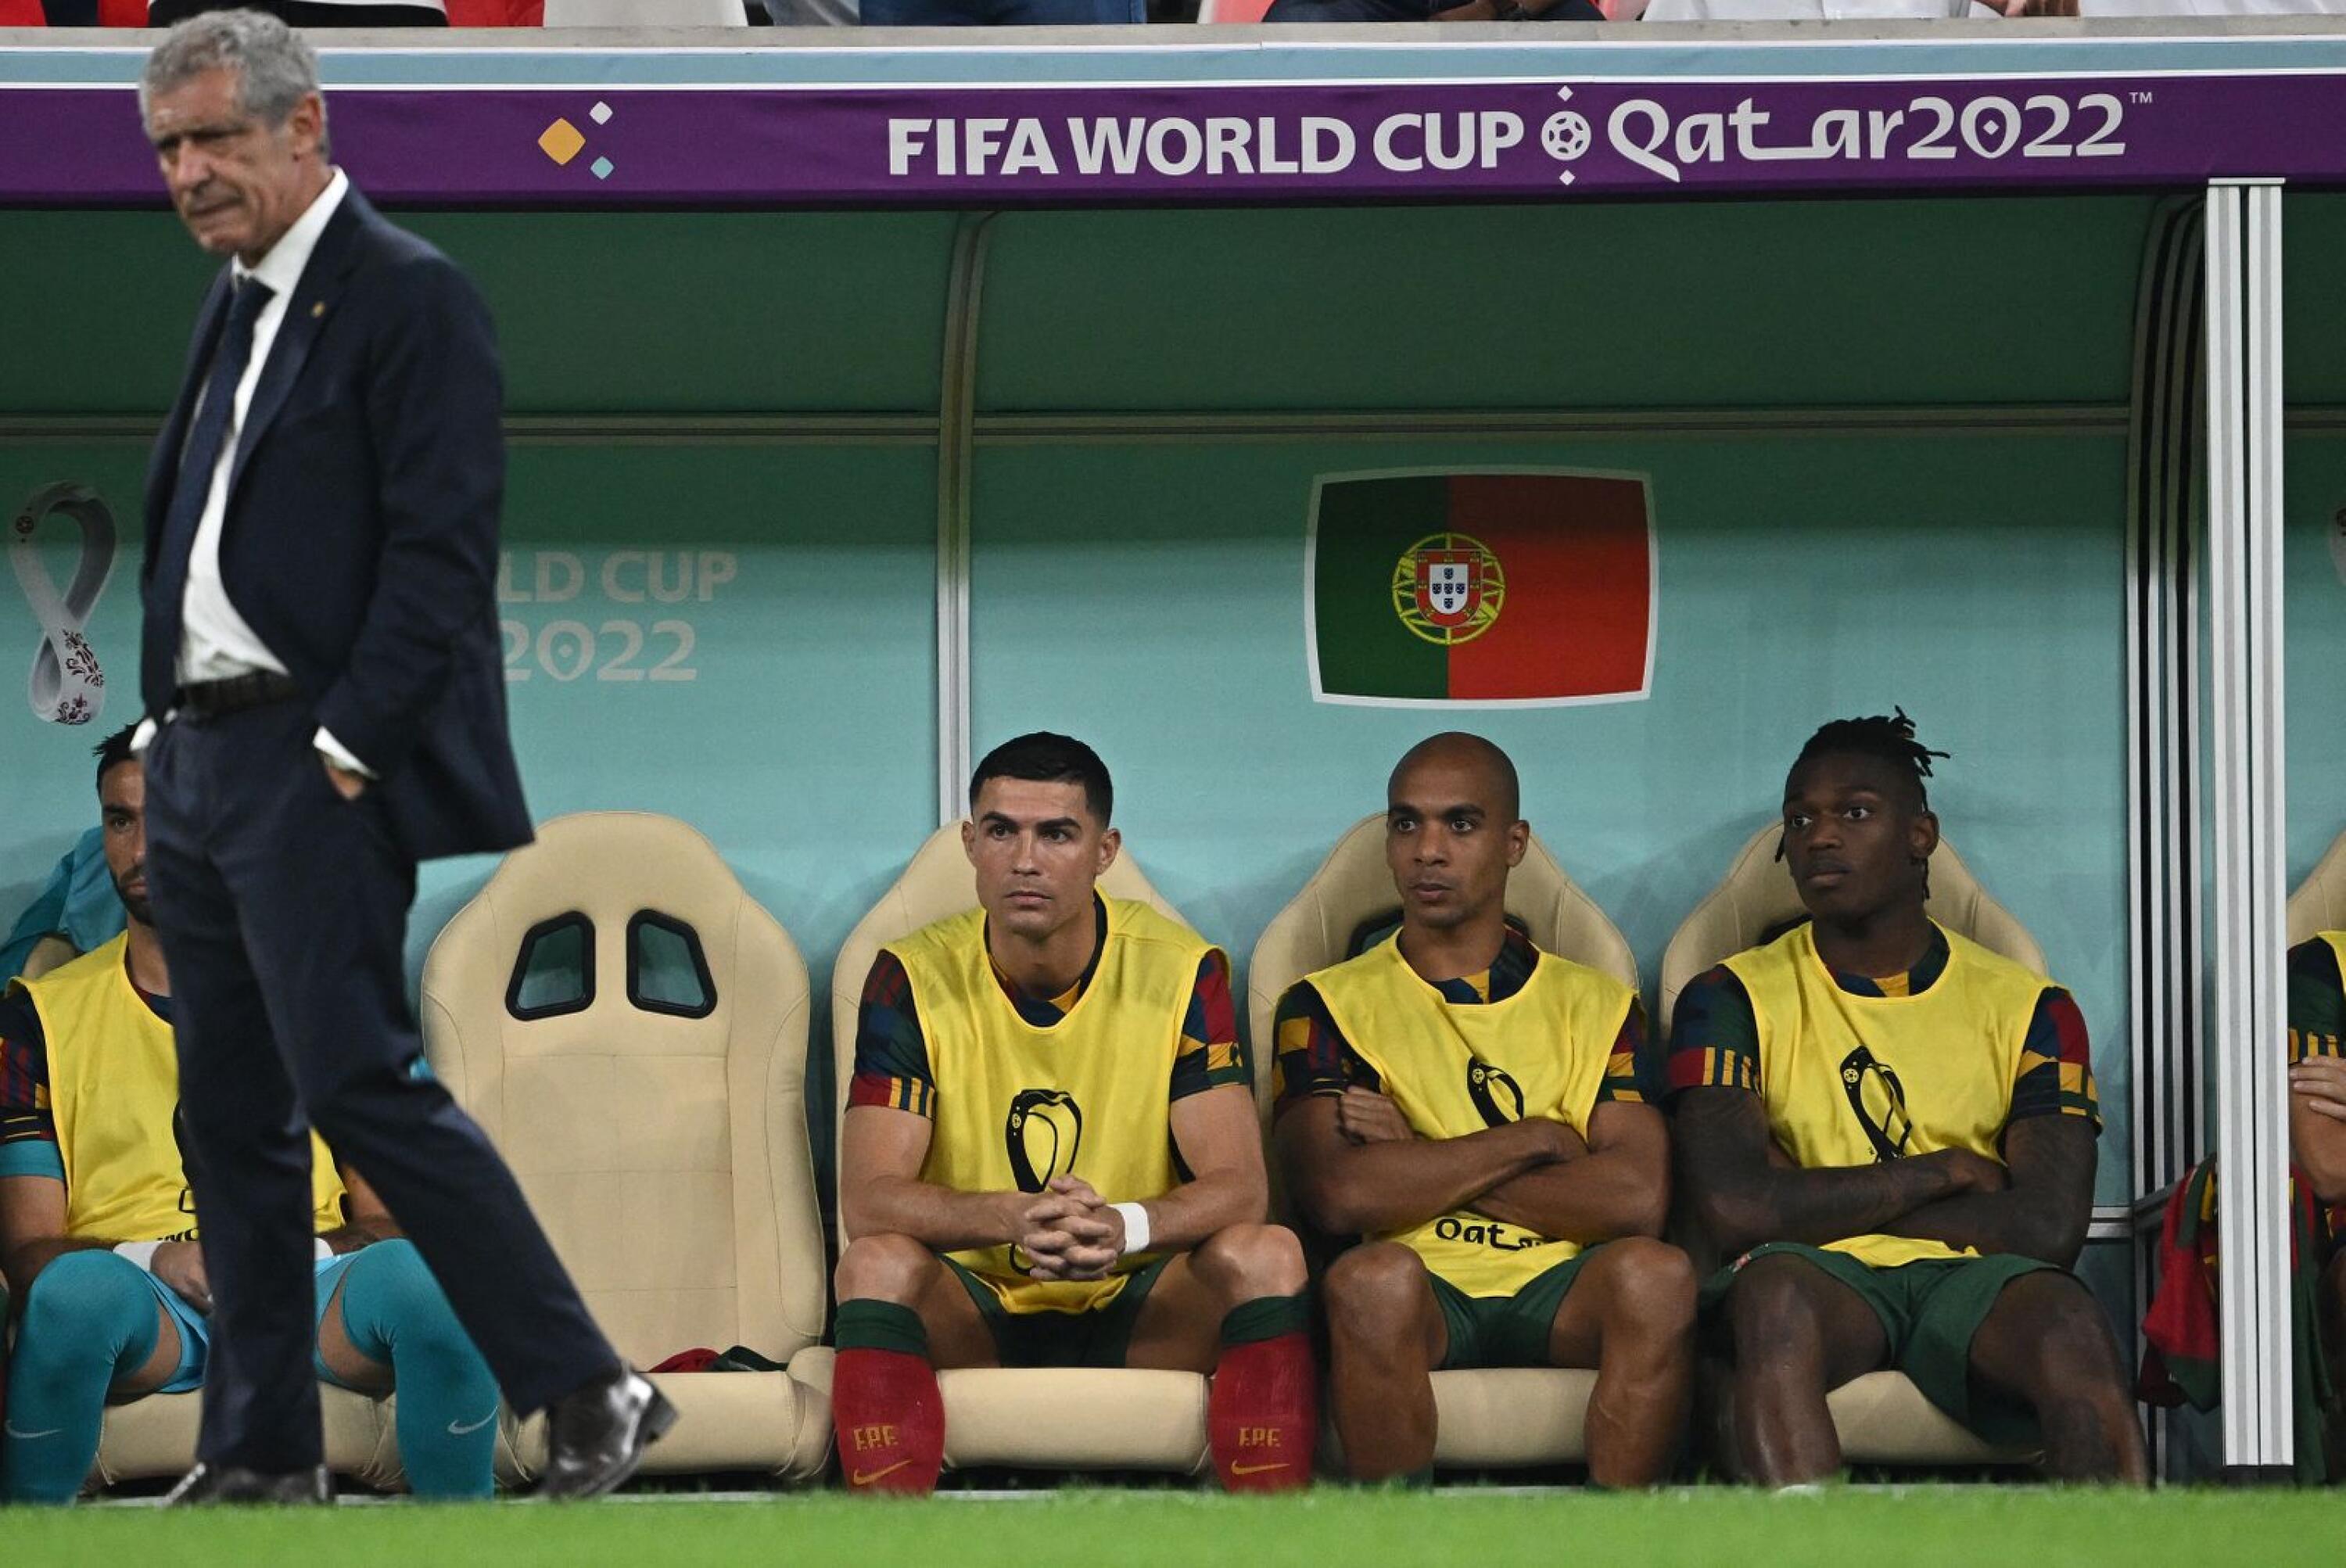 Portugal's Cristiano Ronaldo sits on the bench next to Joao Mario and Rafael Leao during their Qatar 2022 World Cup round of 16 football match against Switzerland